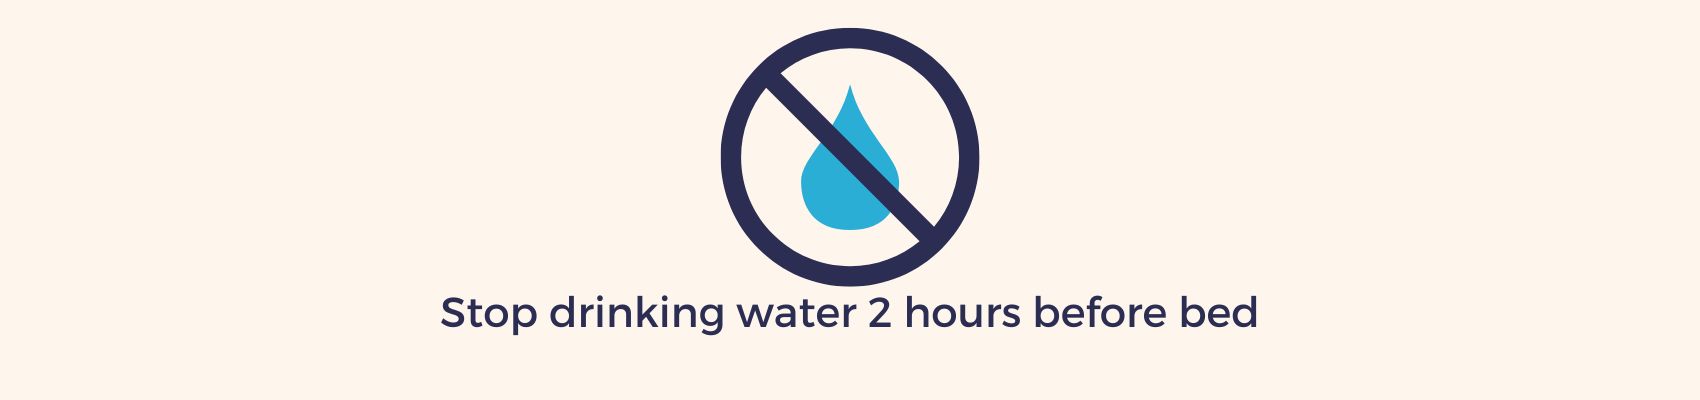 stop drinking water